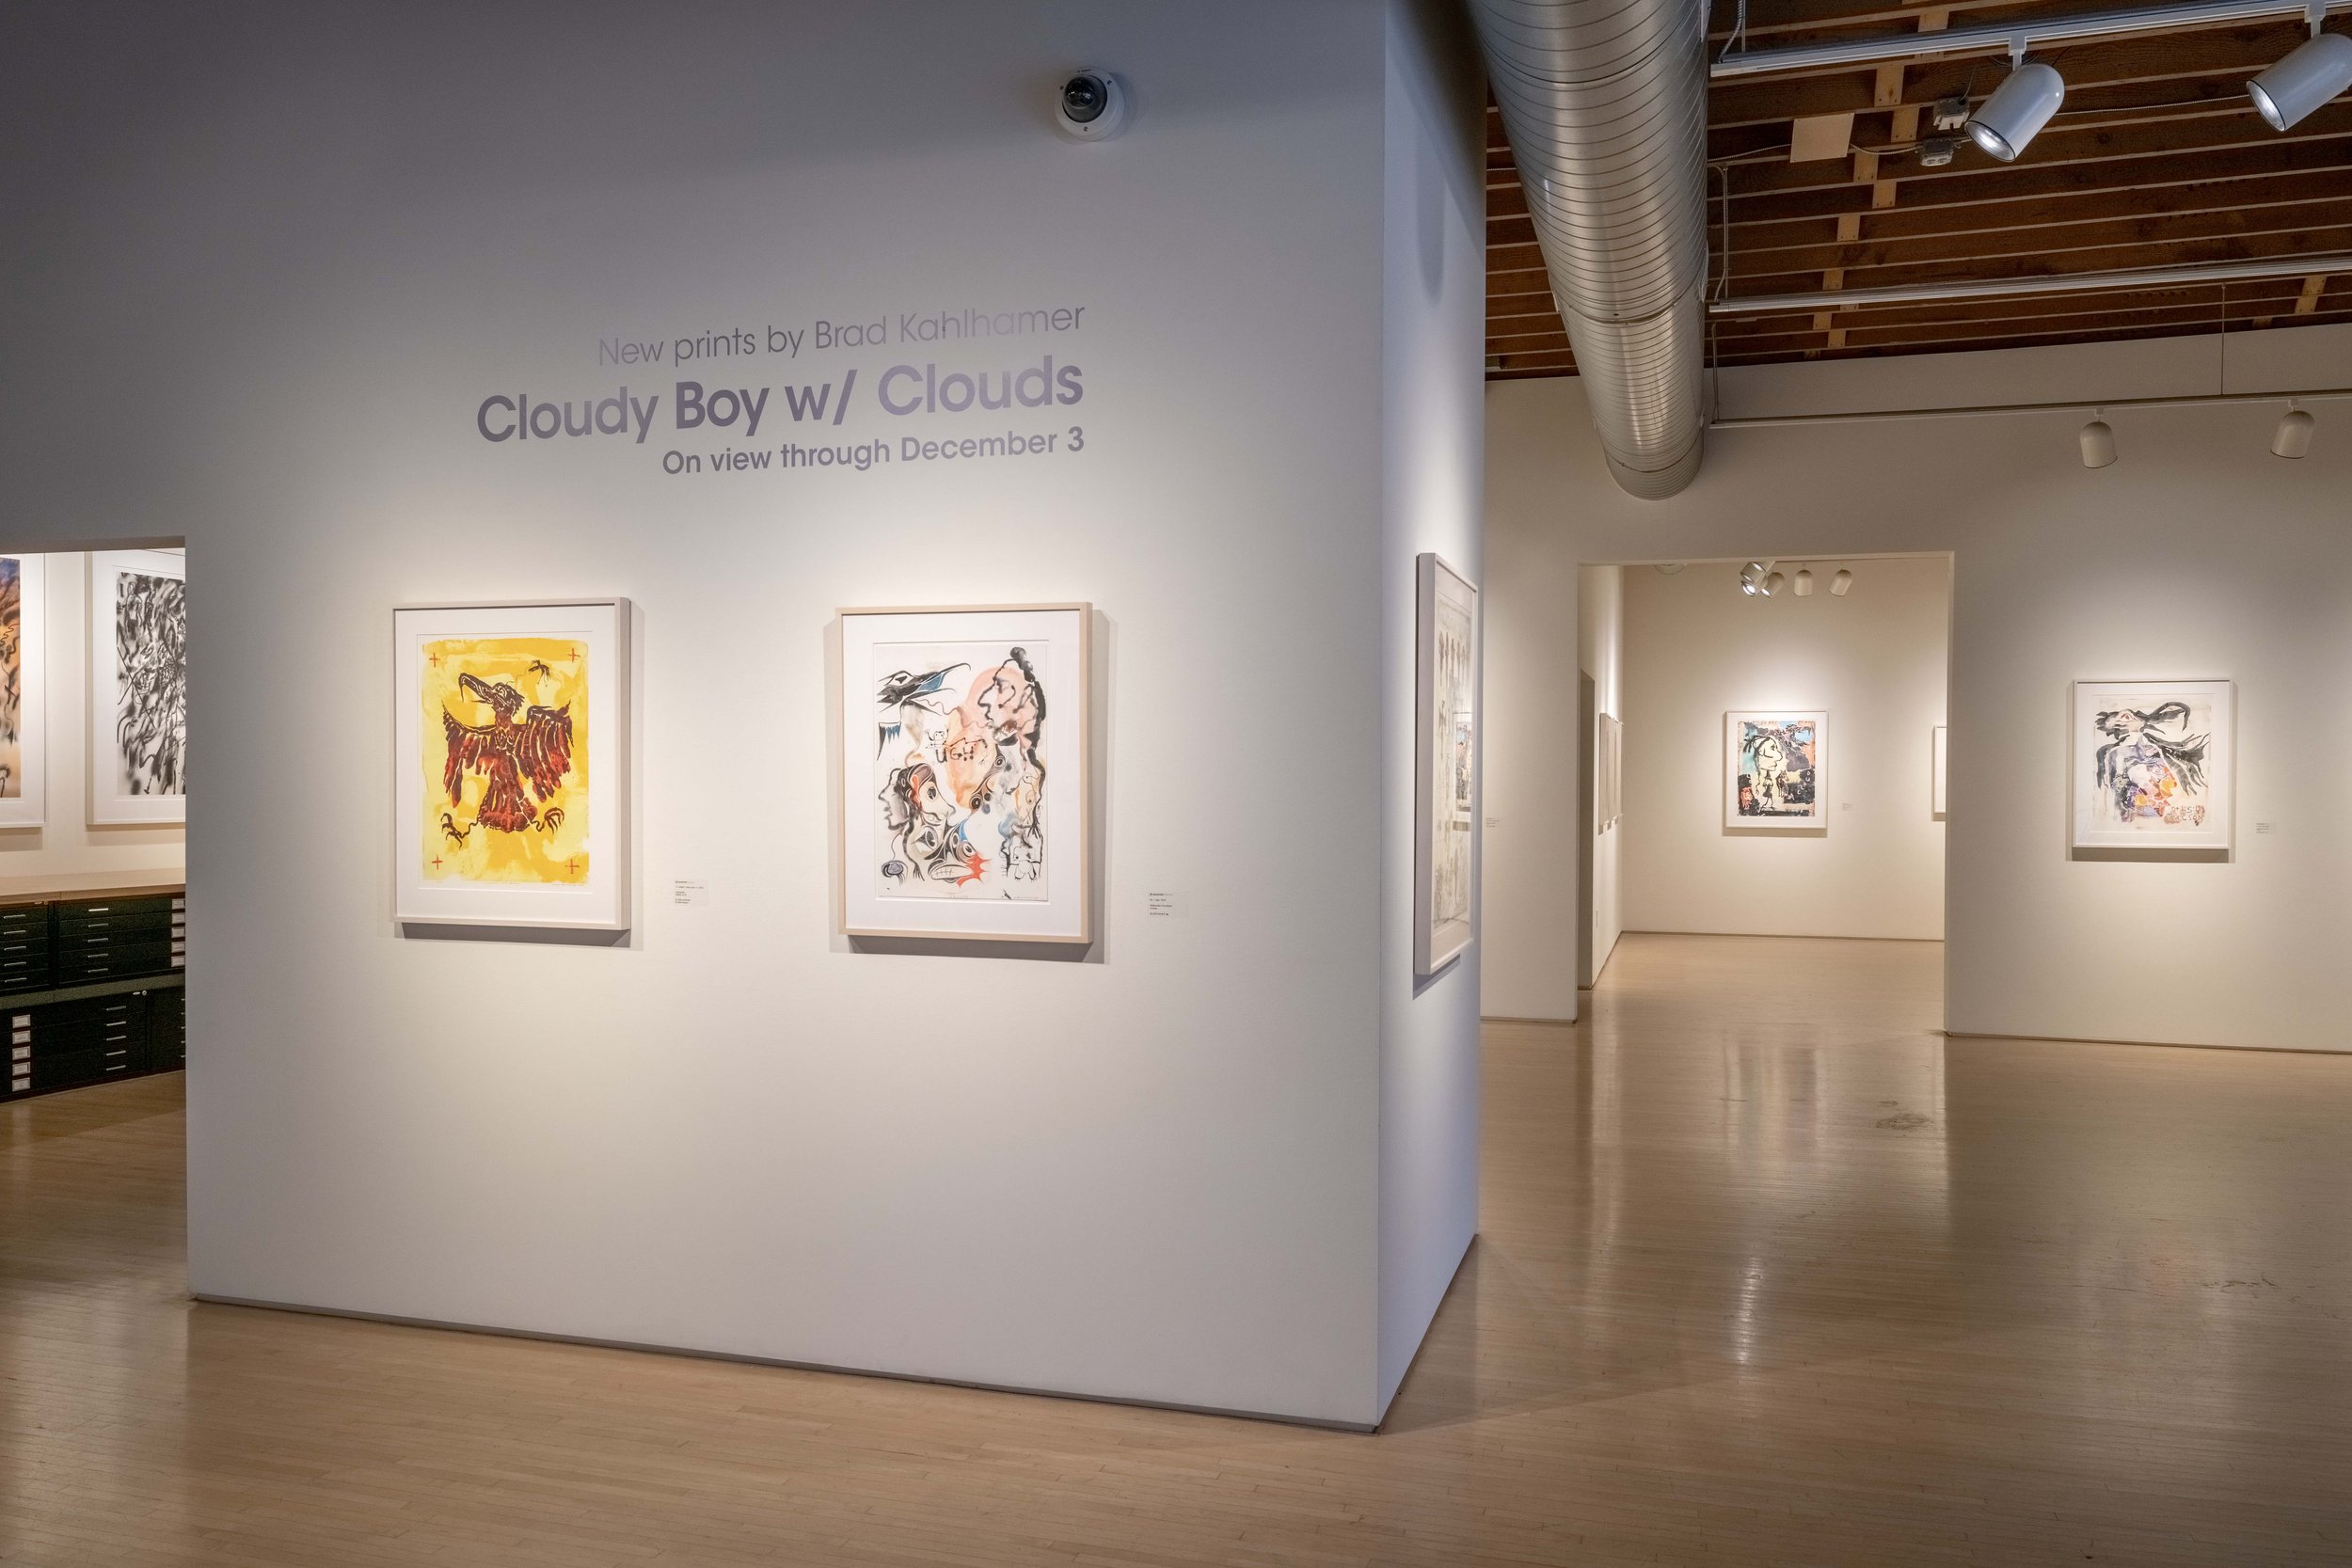 2022-11-05 - Cloudy Boy with Clouds by Brad Kahlhamer - 07.jpg